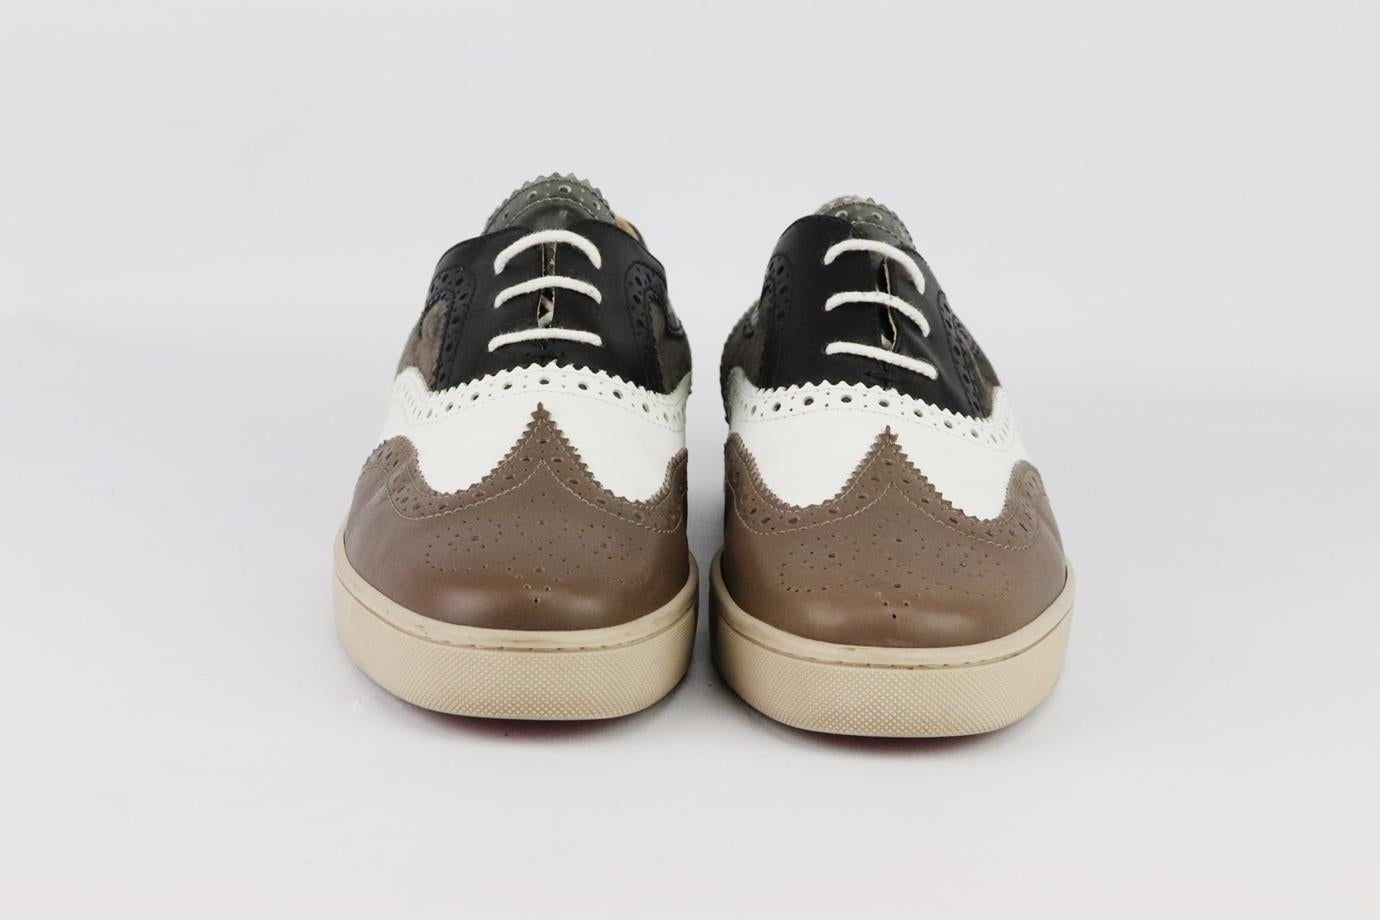 Christian Louboutin colour block leather and suede sneakers. Made from black, white, silver and brown leather with brown suede patch with perforated detail and finished with the brand’s iconic red sole. Brown, black, white and silver. Lace up